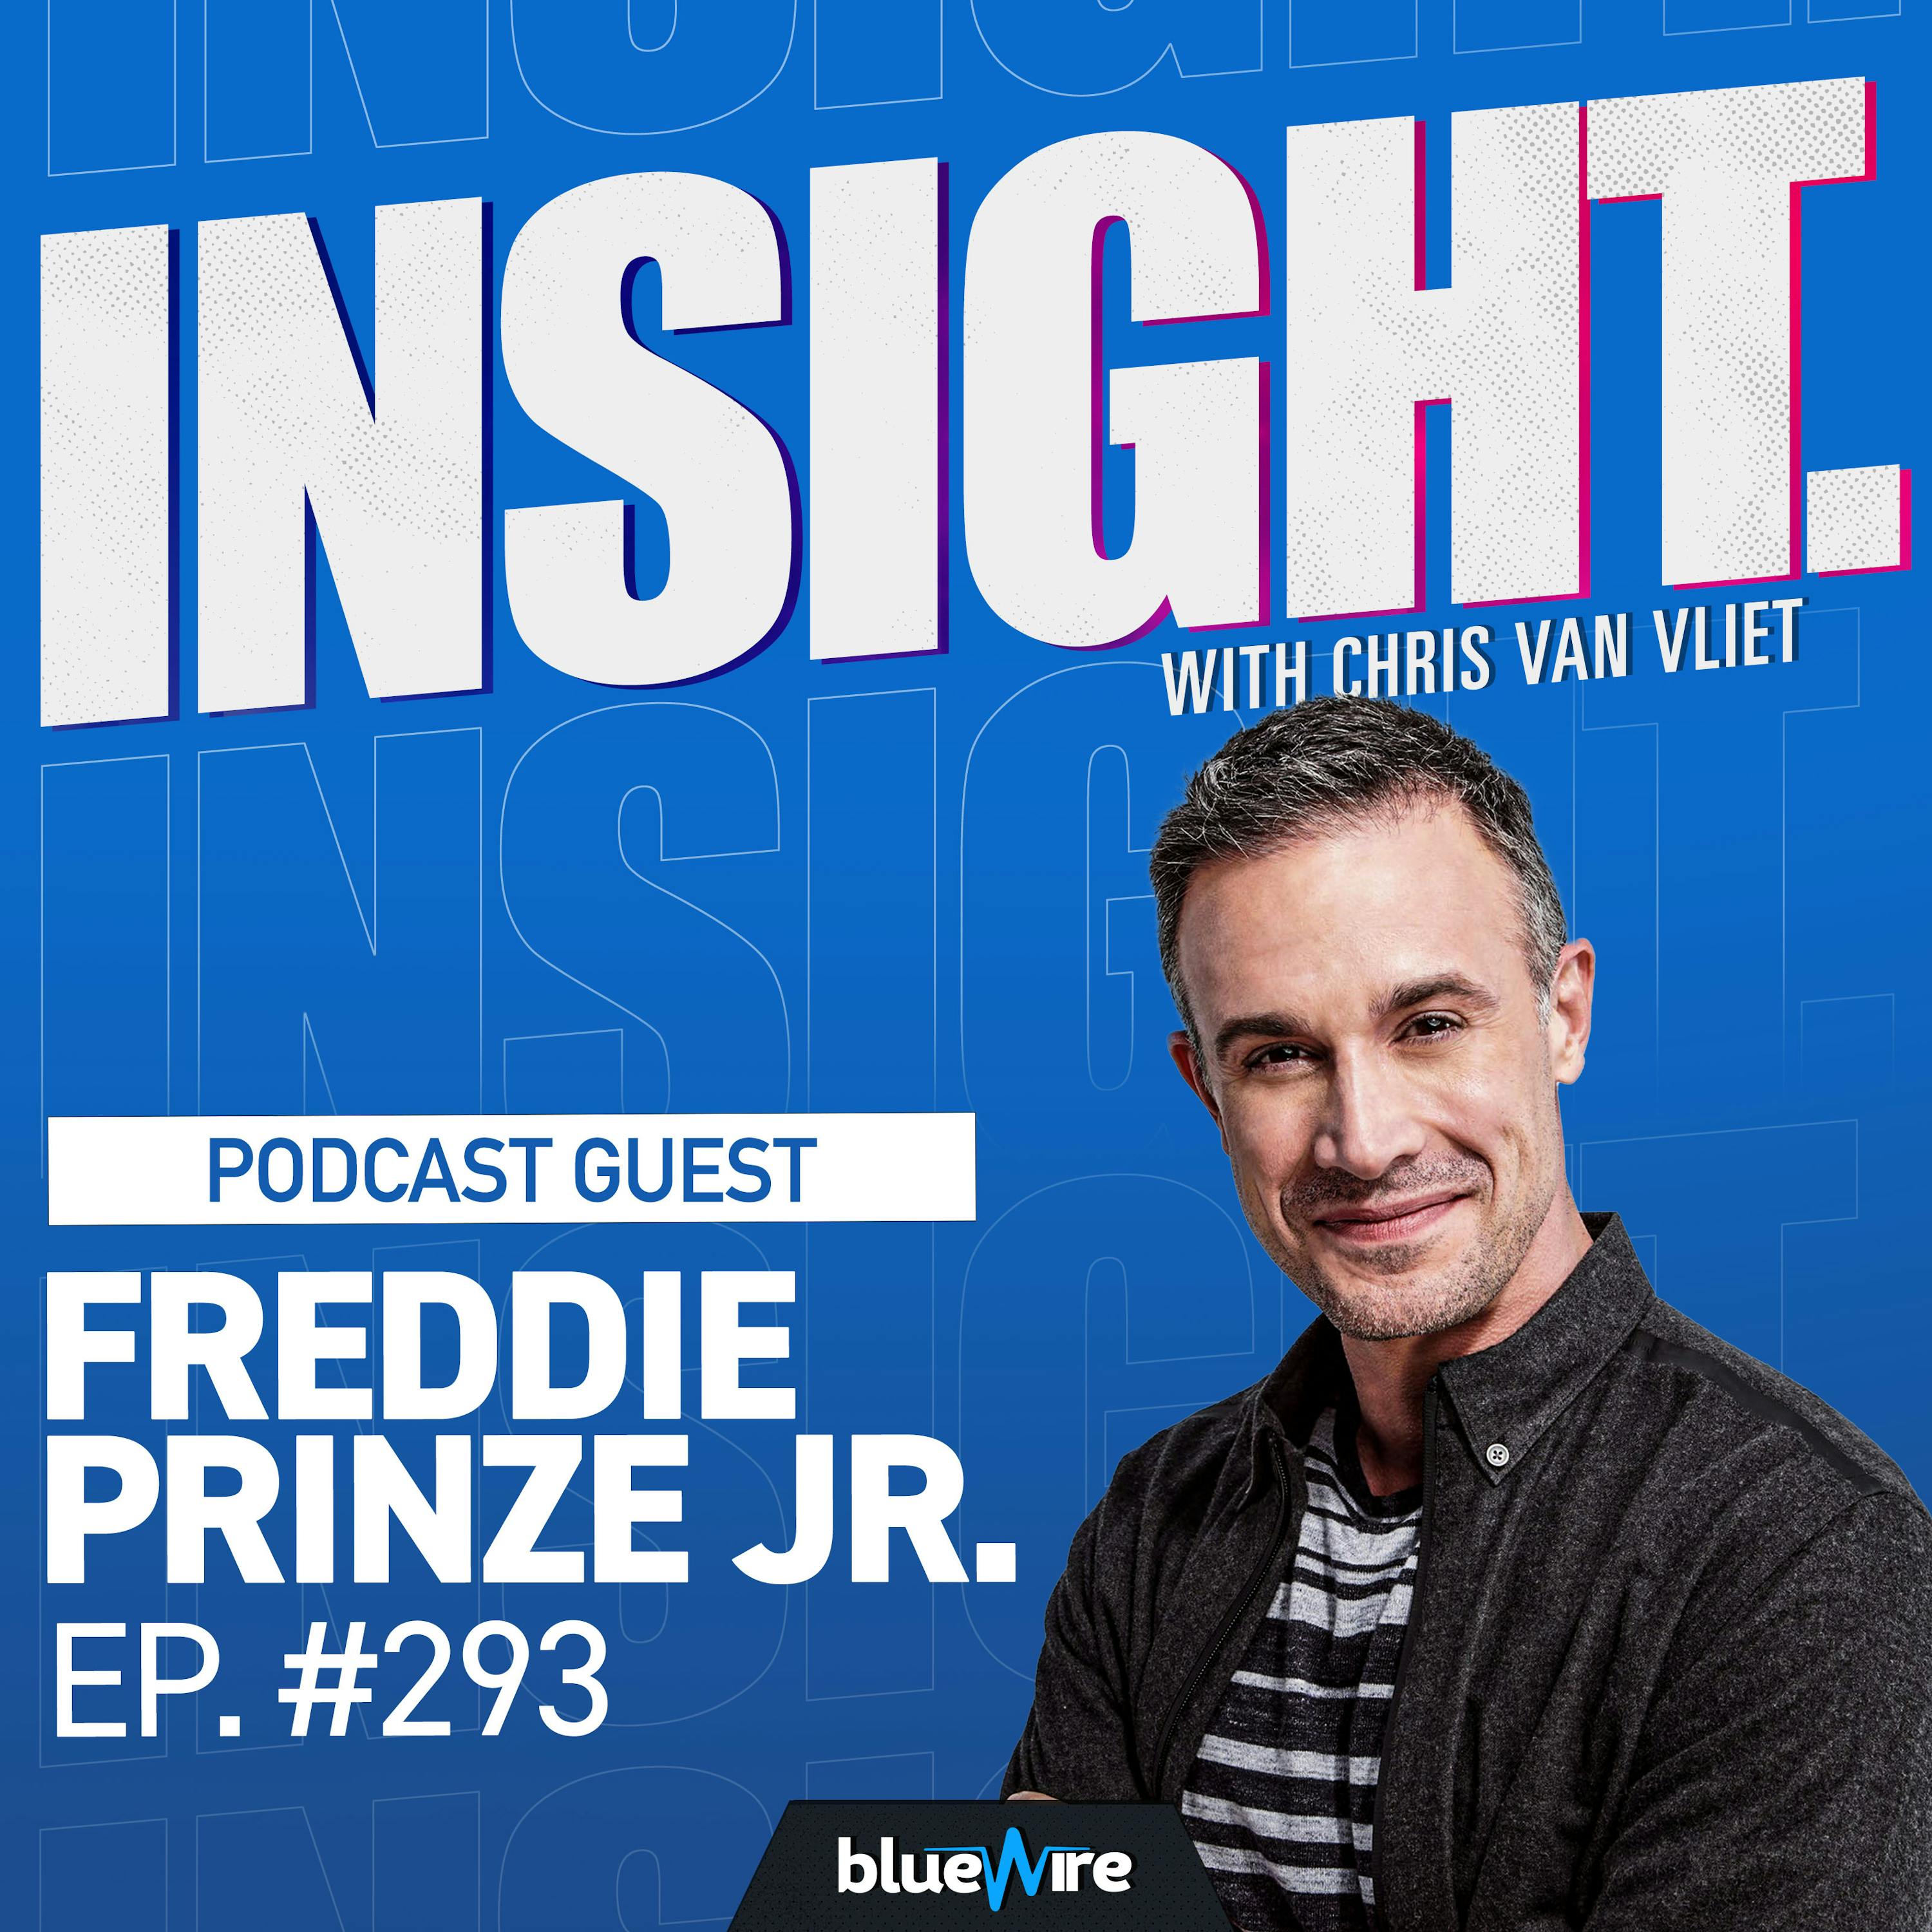 Freddie Prinze Jr. On Working For WWE, Issues With John Cena, His Wife Sarah Michelle Gellar - Interview From January 2021